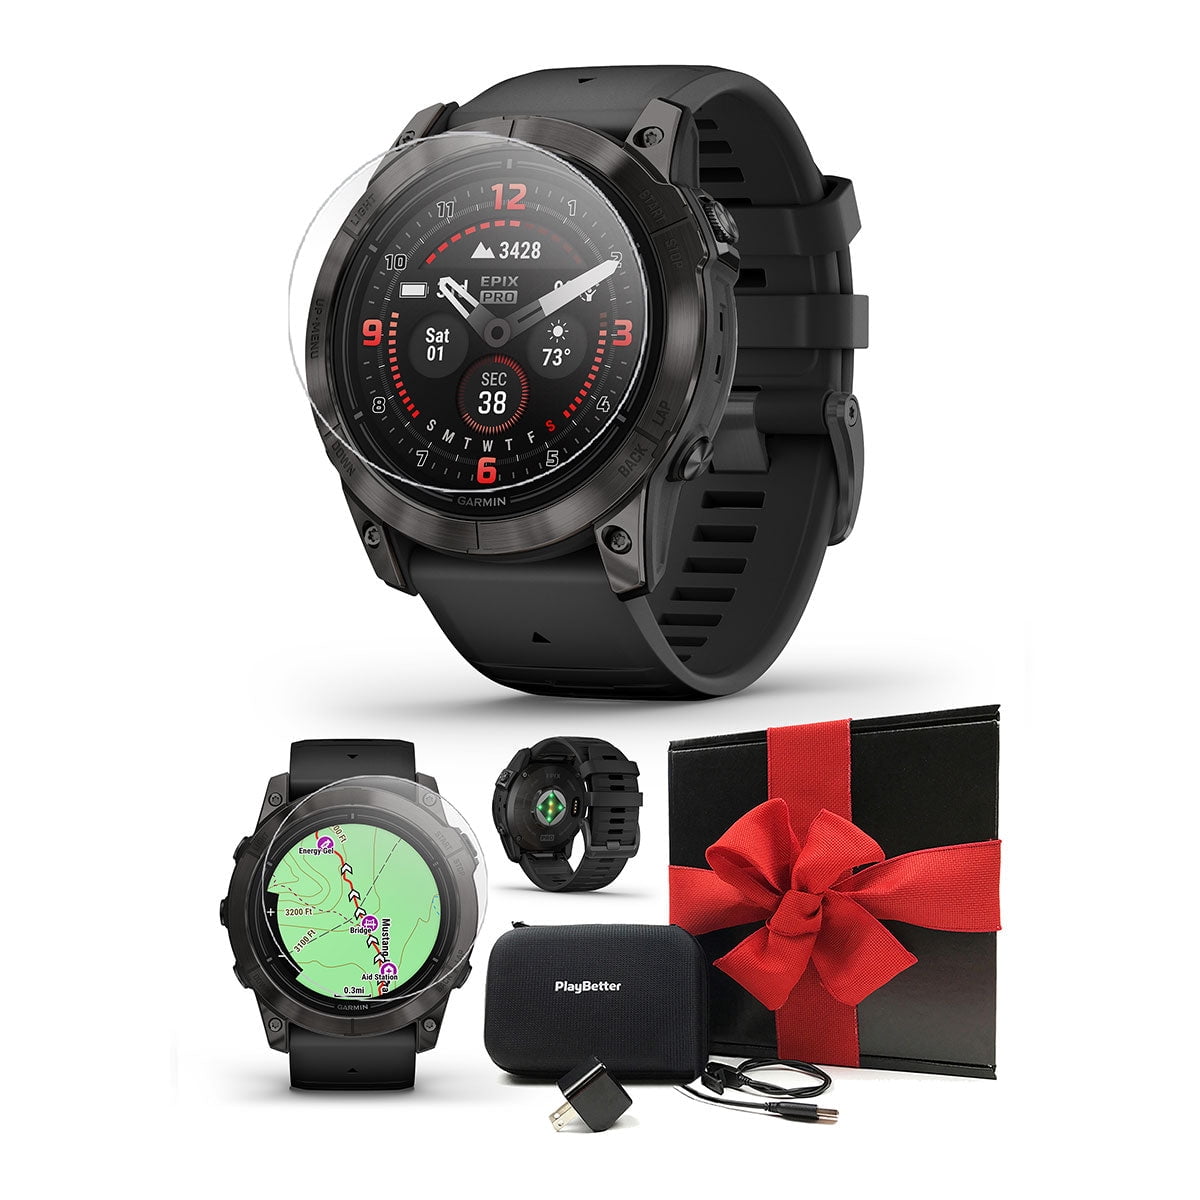 The Garmin Epix Gen 2 Smart Watch Carrying on the Baton of Excellence -  Strapcode